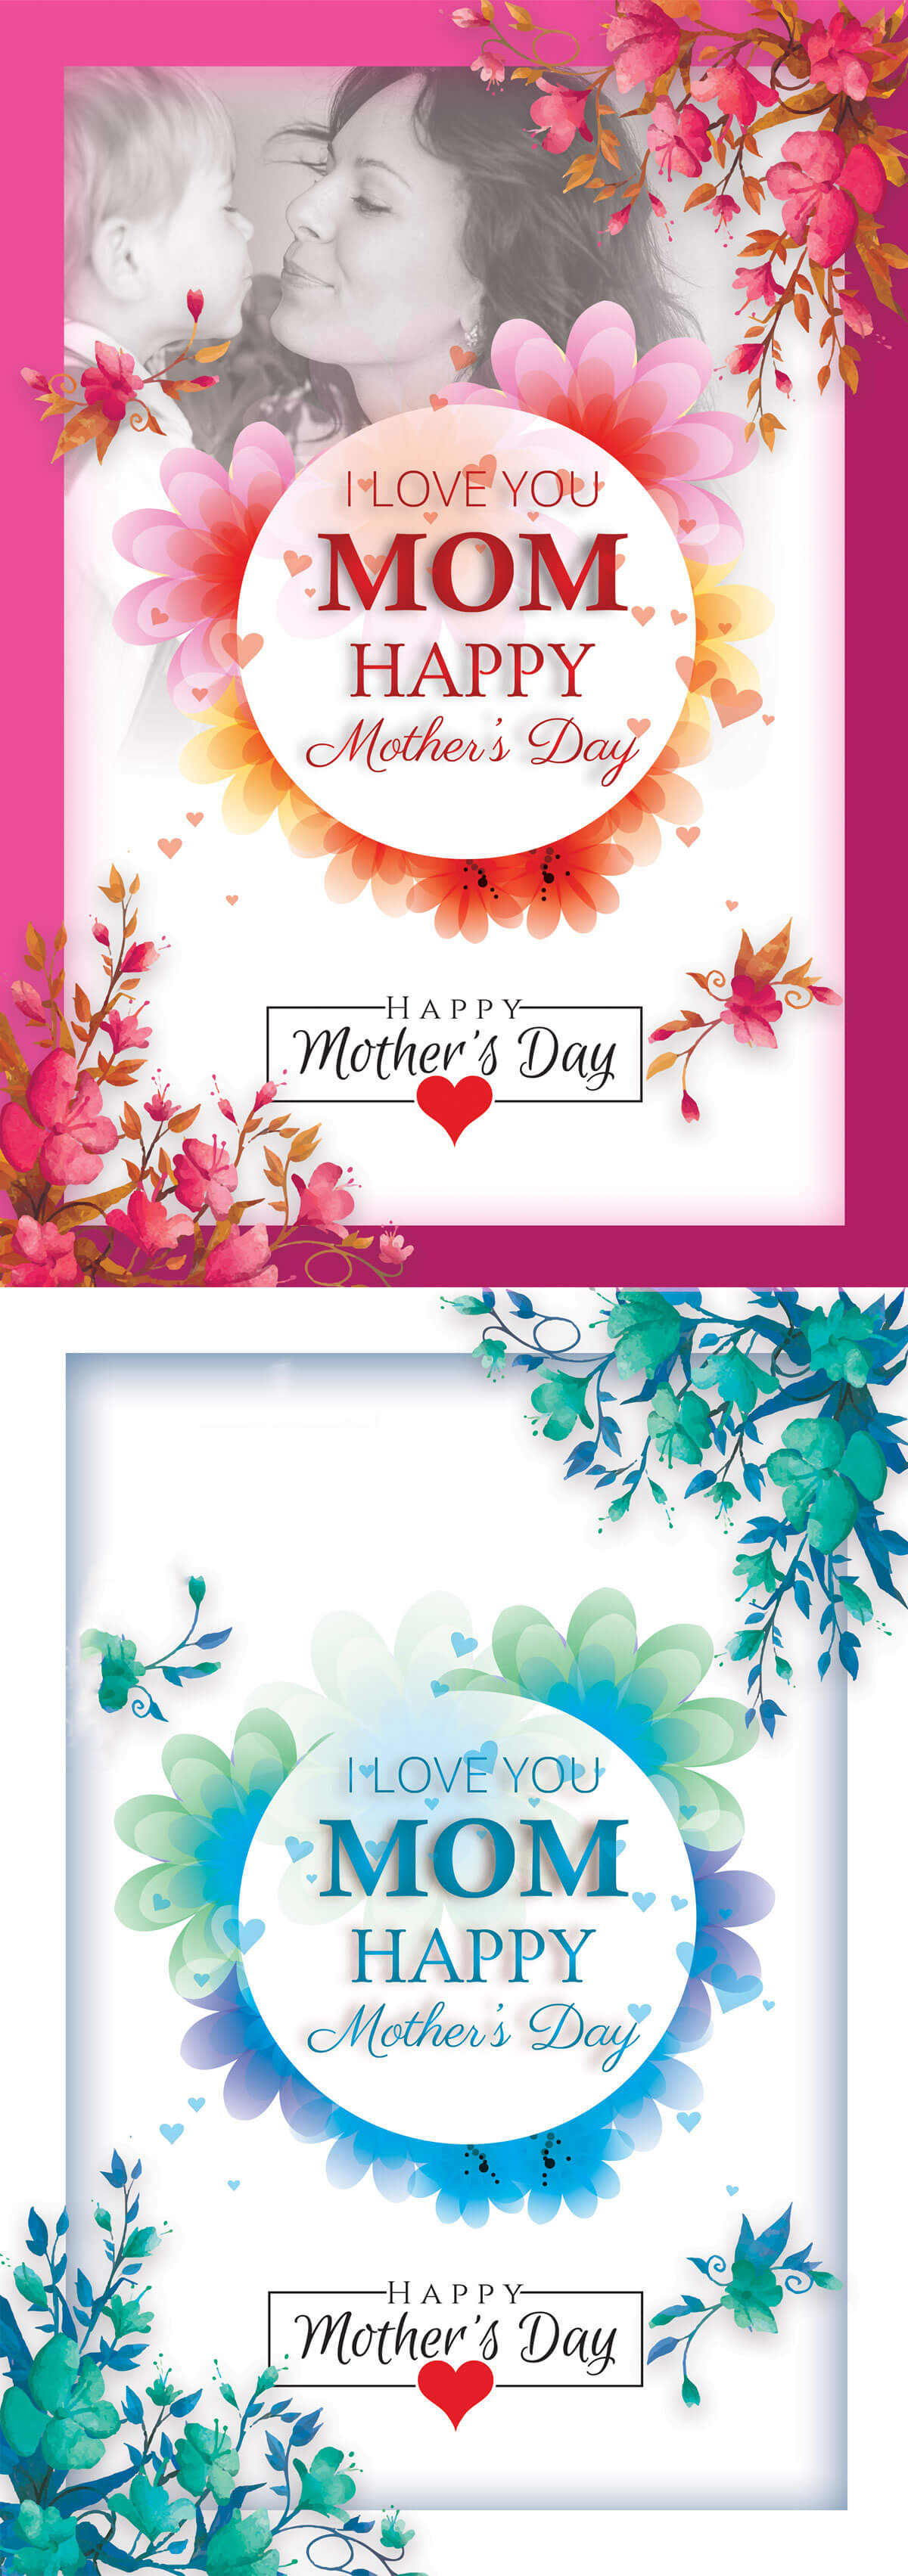 Free Happy Mothers Day Flyer PSD Template